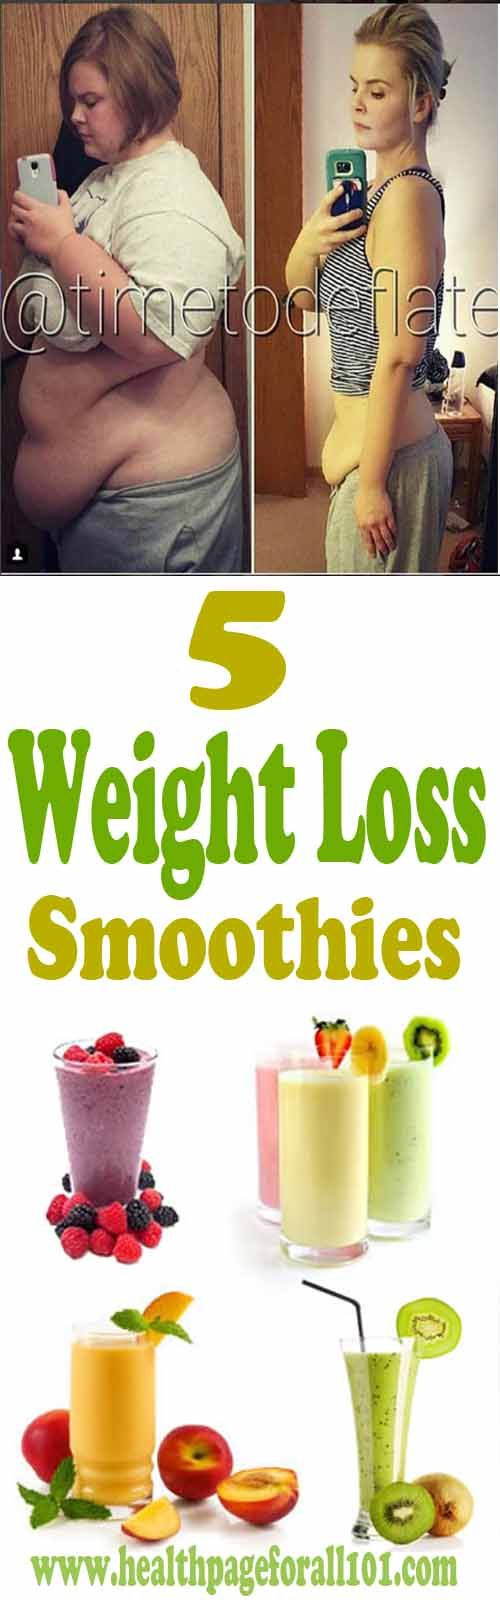 Detox Smoothies To Shed Belly Weight
 5 Detox Smoothies to shed belly weight and keep you